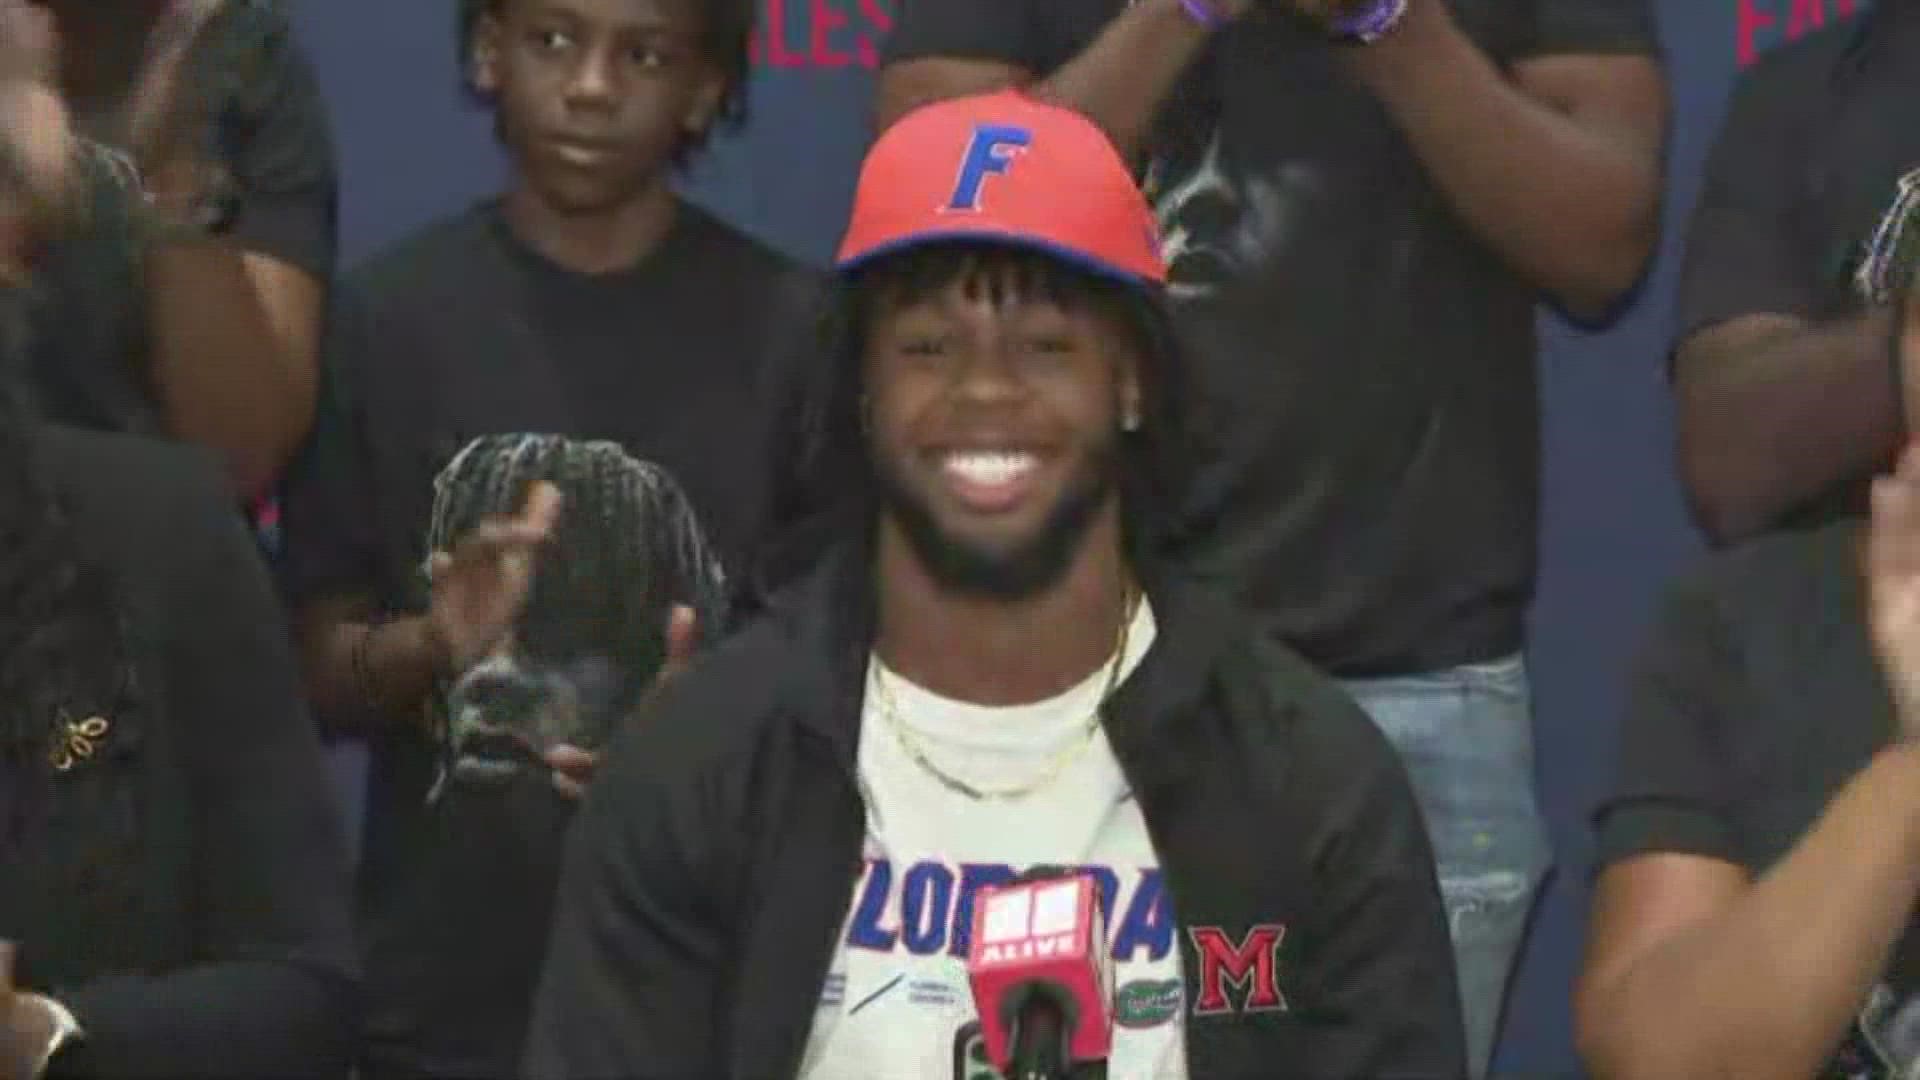 Milton High School 3-star safety Bryce Thornton announced his decision to play for Billy Napier's Florida Gators, turning down Nick Saban and Alabama.